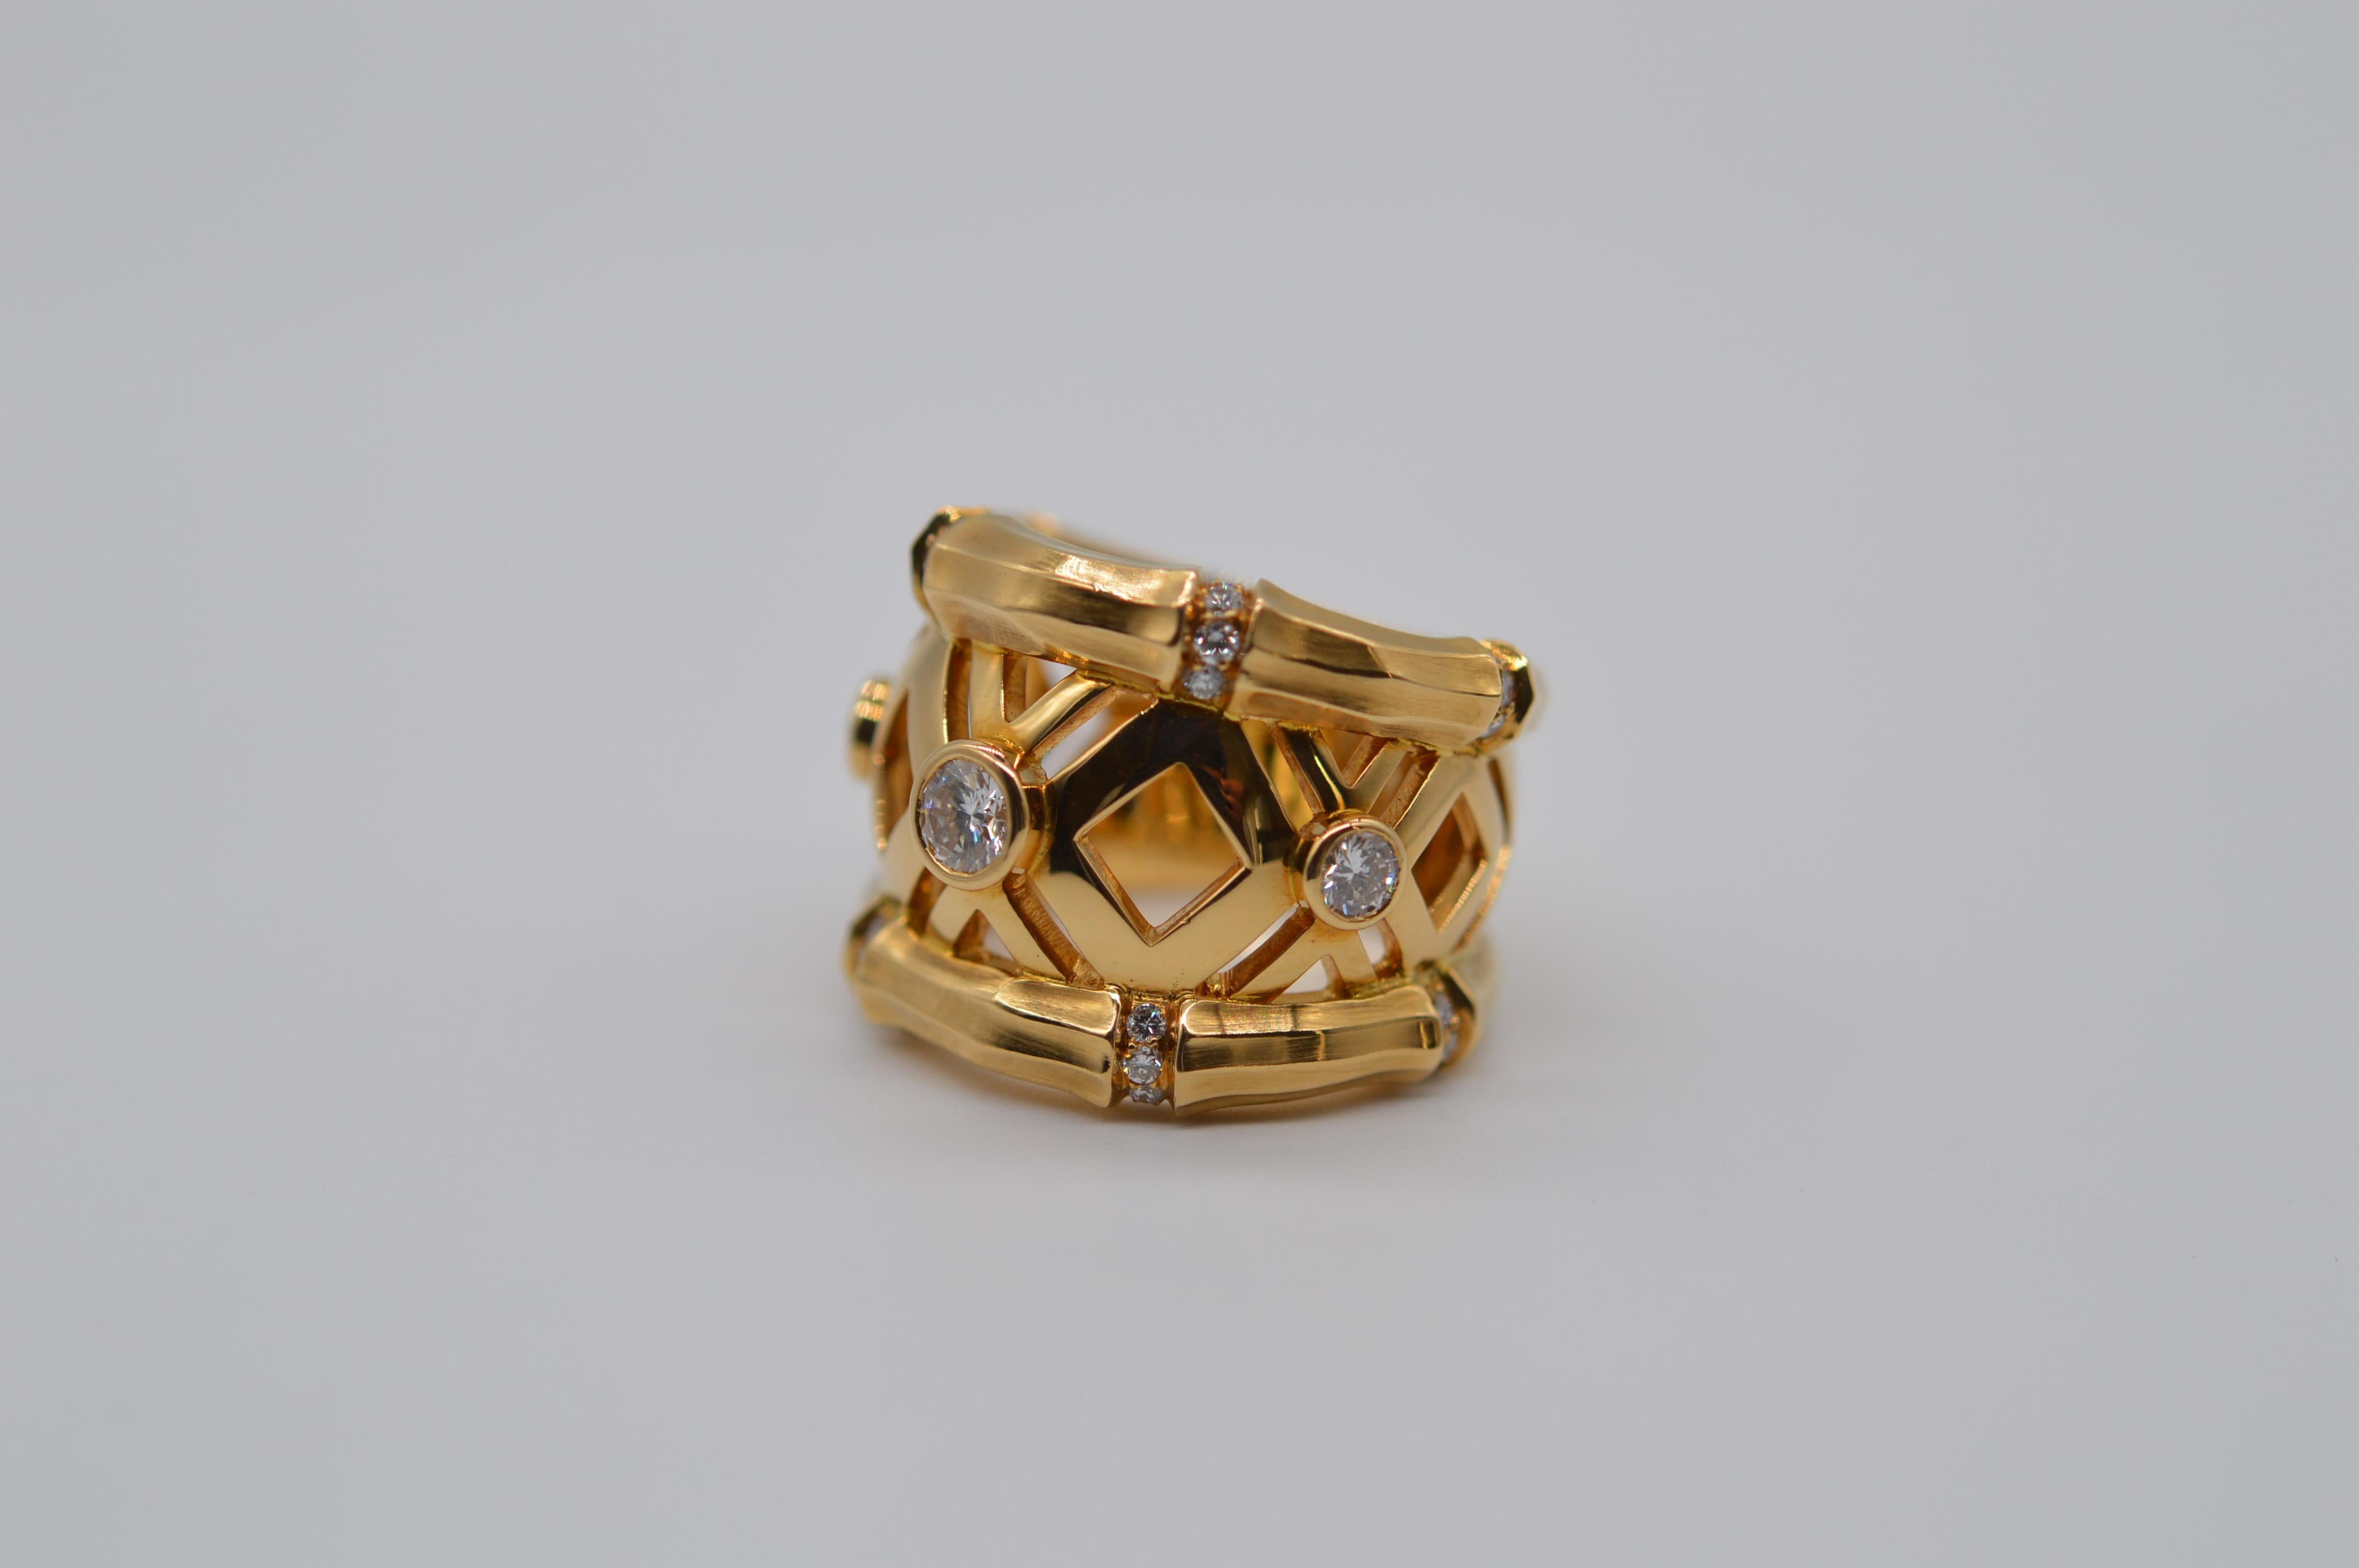 Cartier Bamboo 
18K Yellow Gold Ring
Size 58
Weight 18.9 grams
Diamond Setting
Set with 27 Round Diamonds for a total weight of 0.85 carats
Vintage unworn condition
With original certificate from Cartier 
From 2000